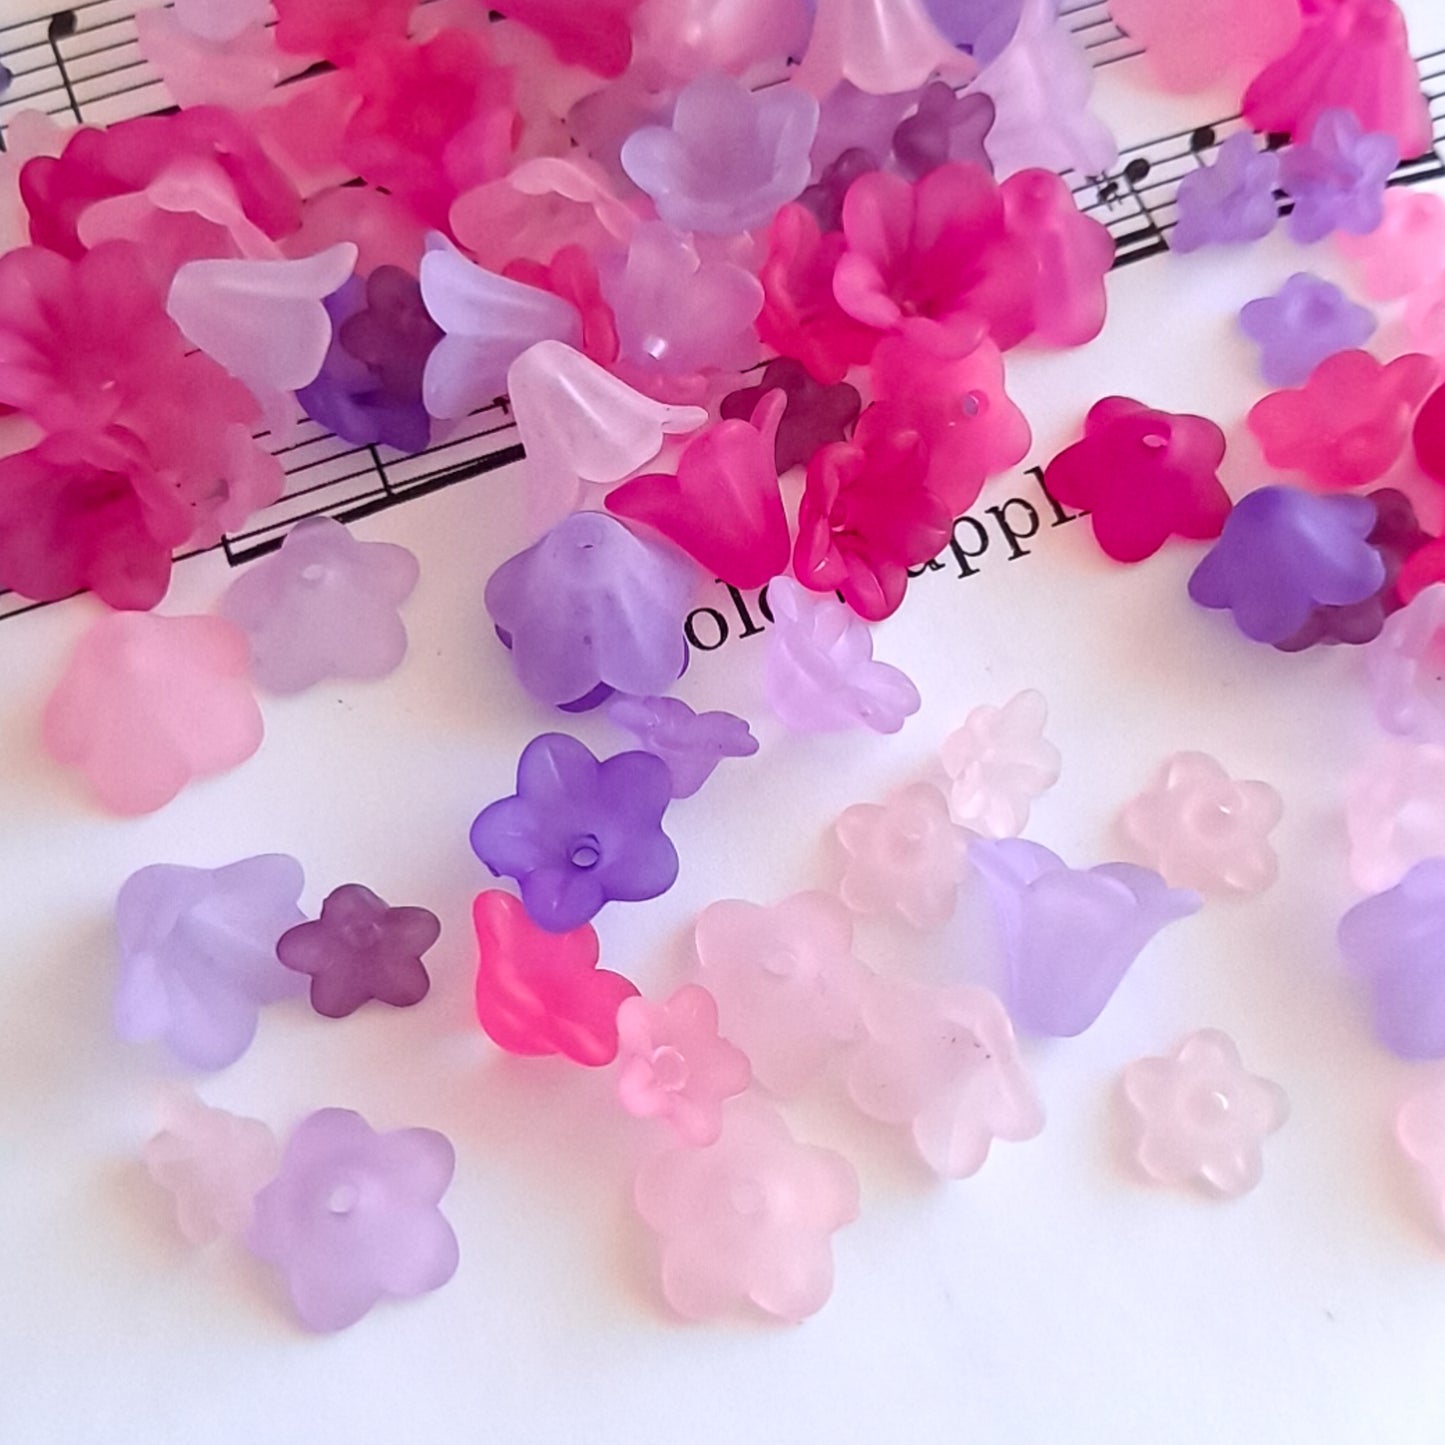 120 Pc Pink and Purple Mix of Trumpet Flower Beads, Assorted Sizes, Colors, Fuchsia, Lavender, Lilac Set, Nesting Beads for DIY Craft Projects